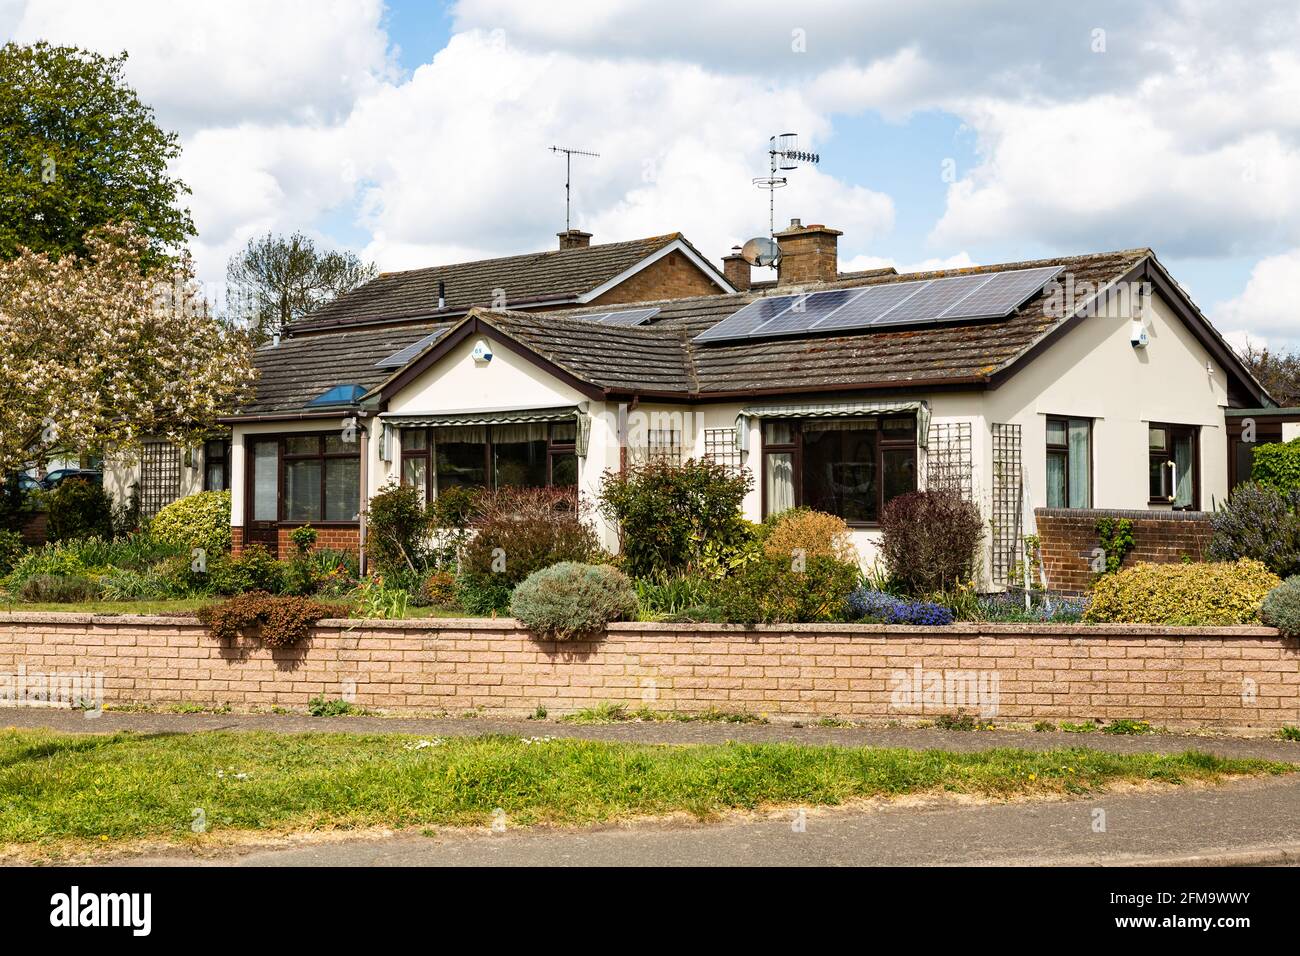 Woodbridge, Suffolk, UK April 30 2021: A small traditional bungalow with solar panels on the roof. Green energy solar energy Stock Photo